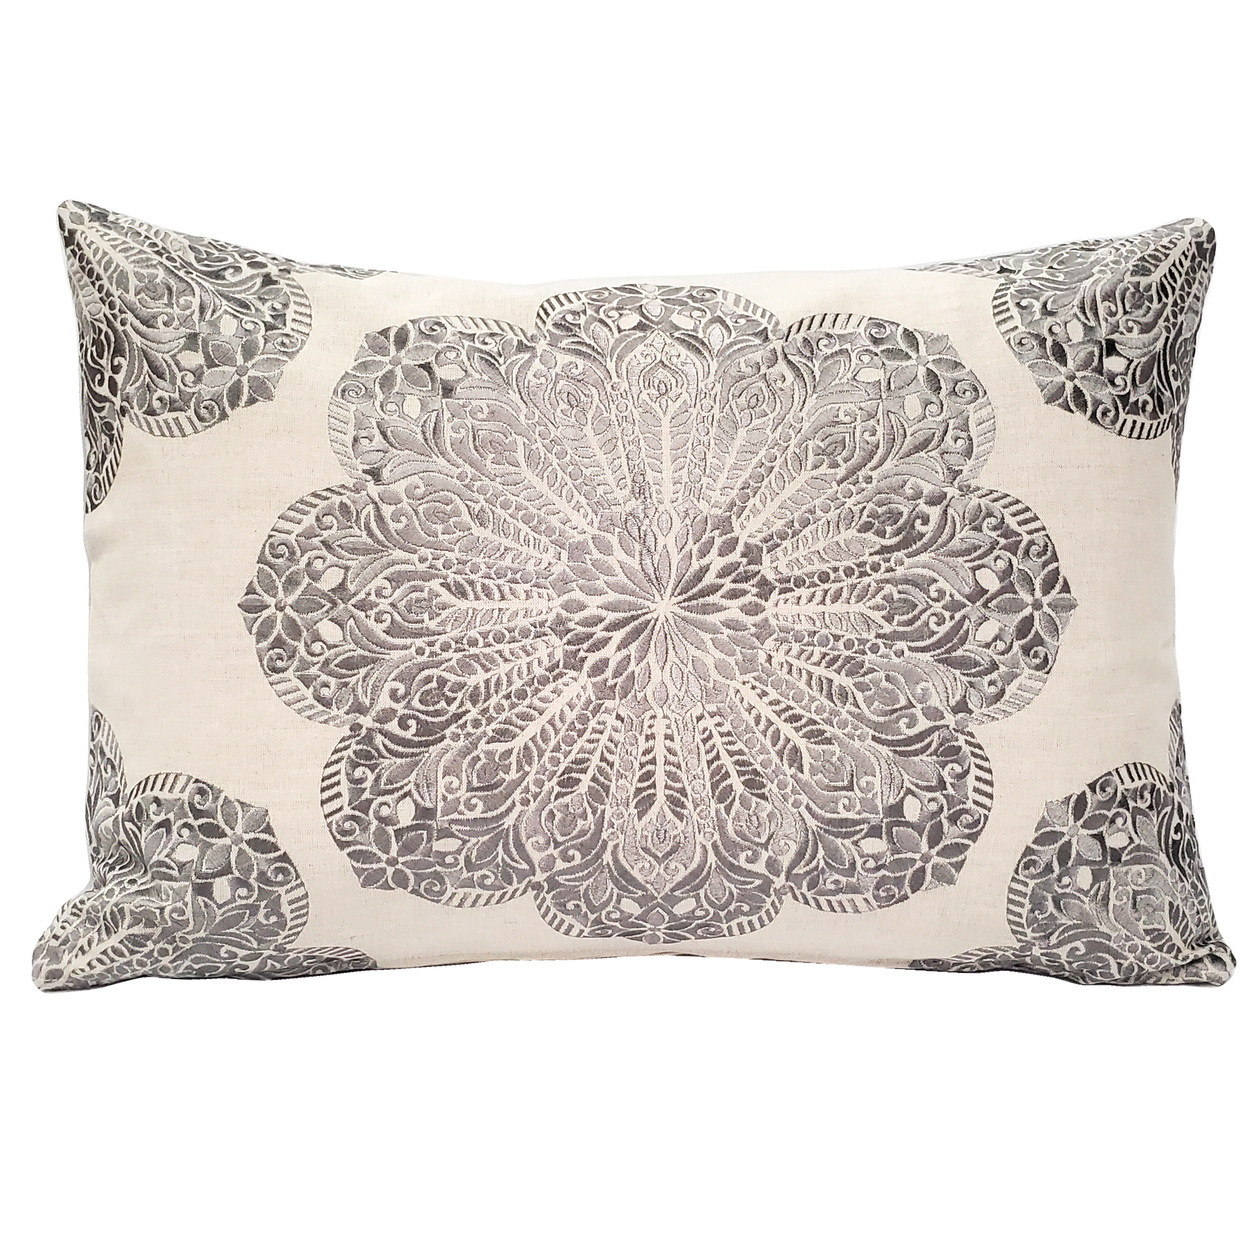 Mancini Natural And Gray Medallion Embroidered Throw Pillow 16x24, With Polyfill Insert